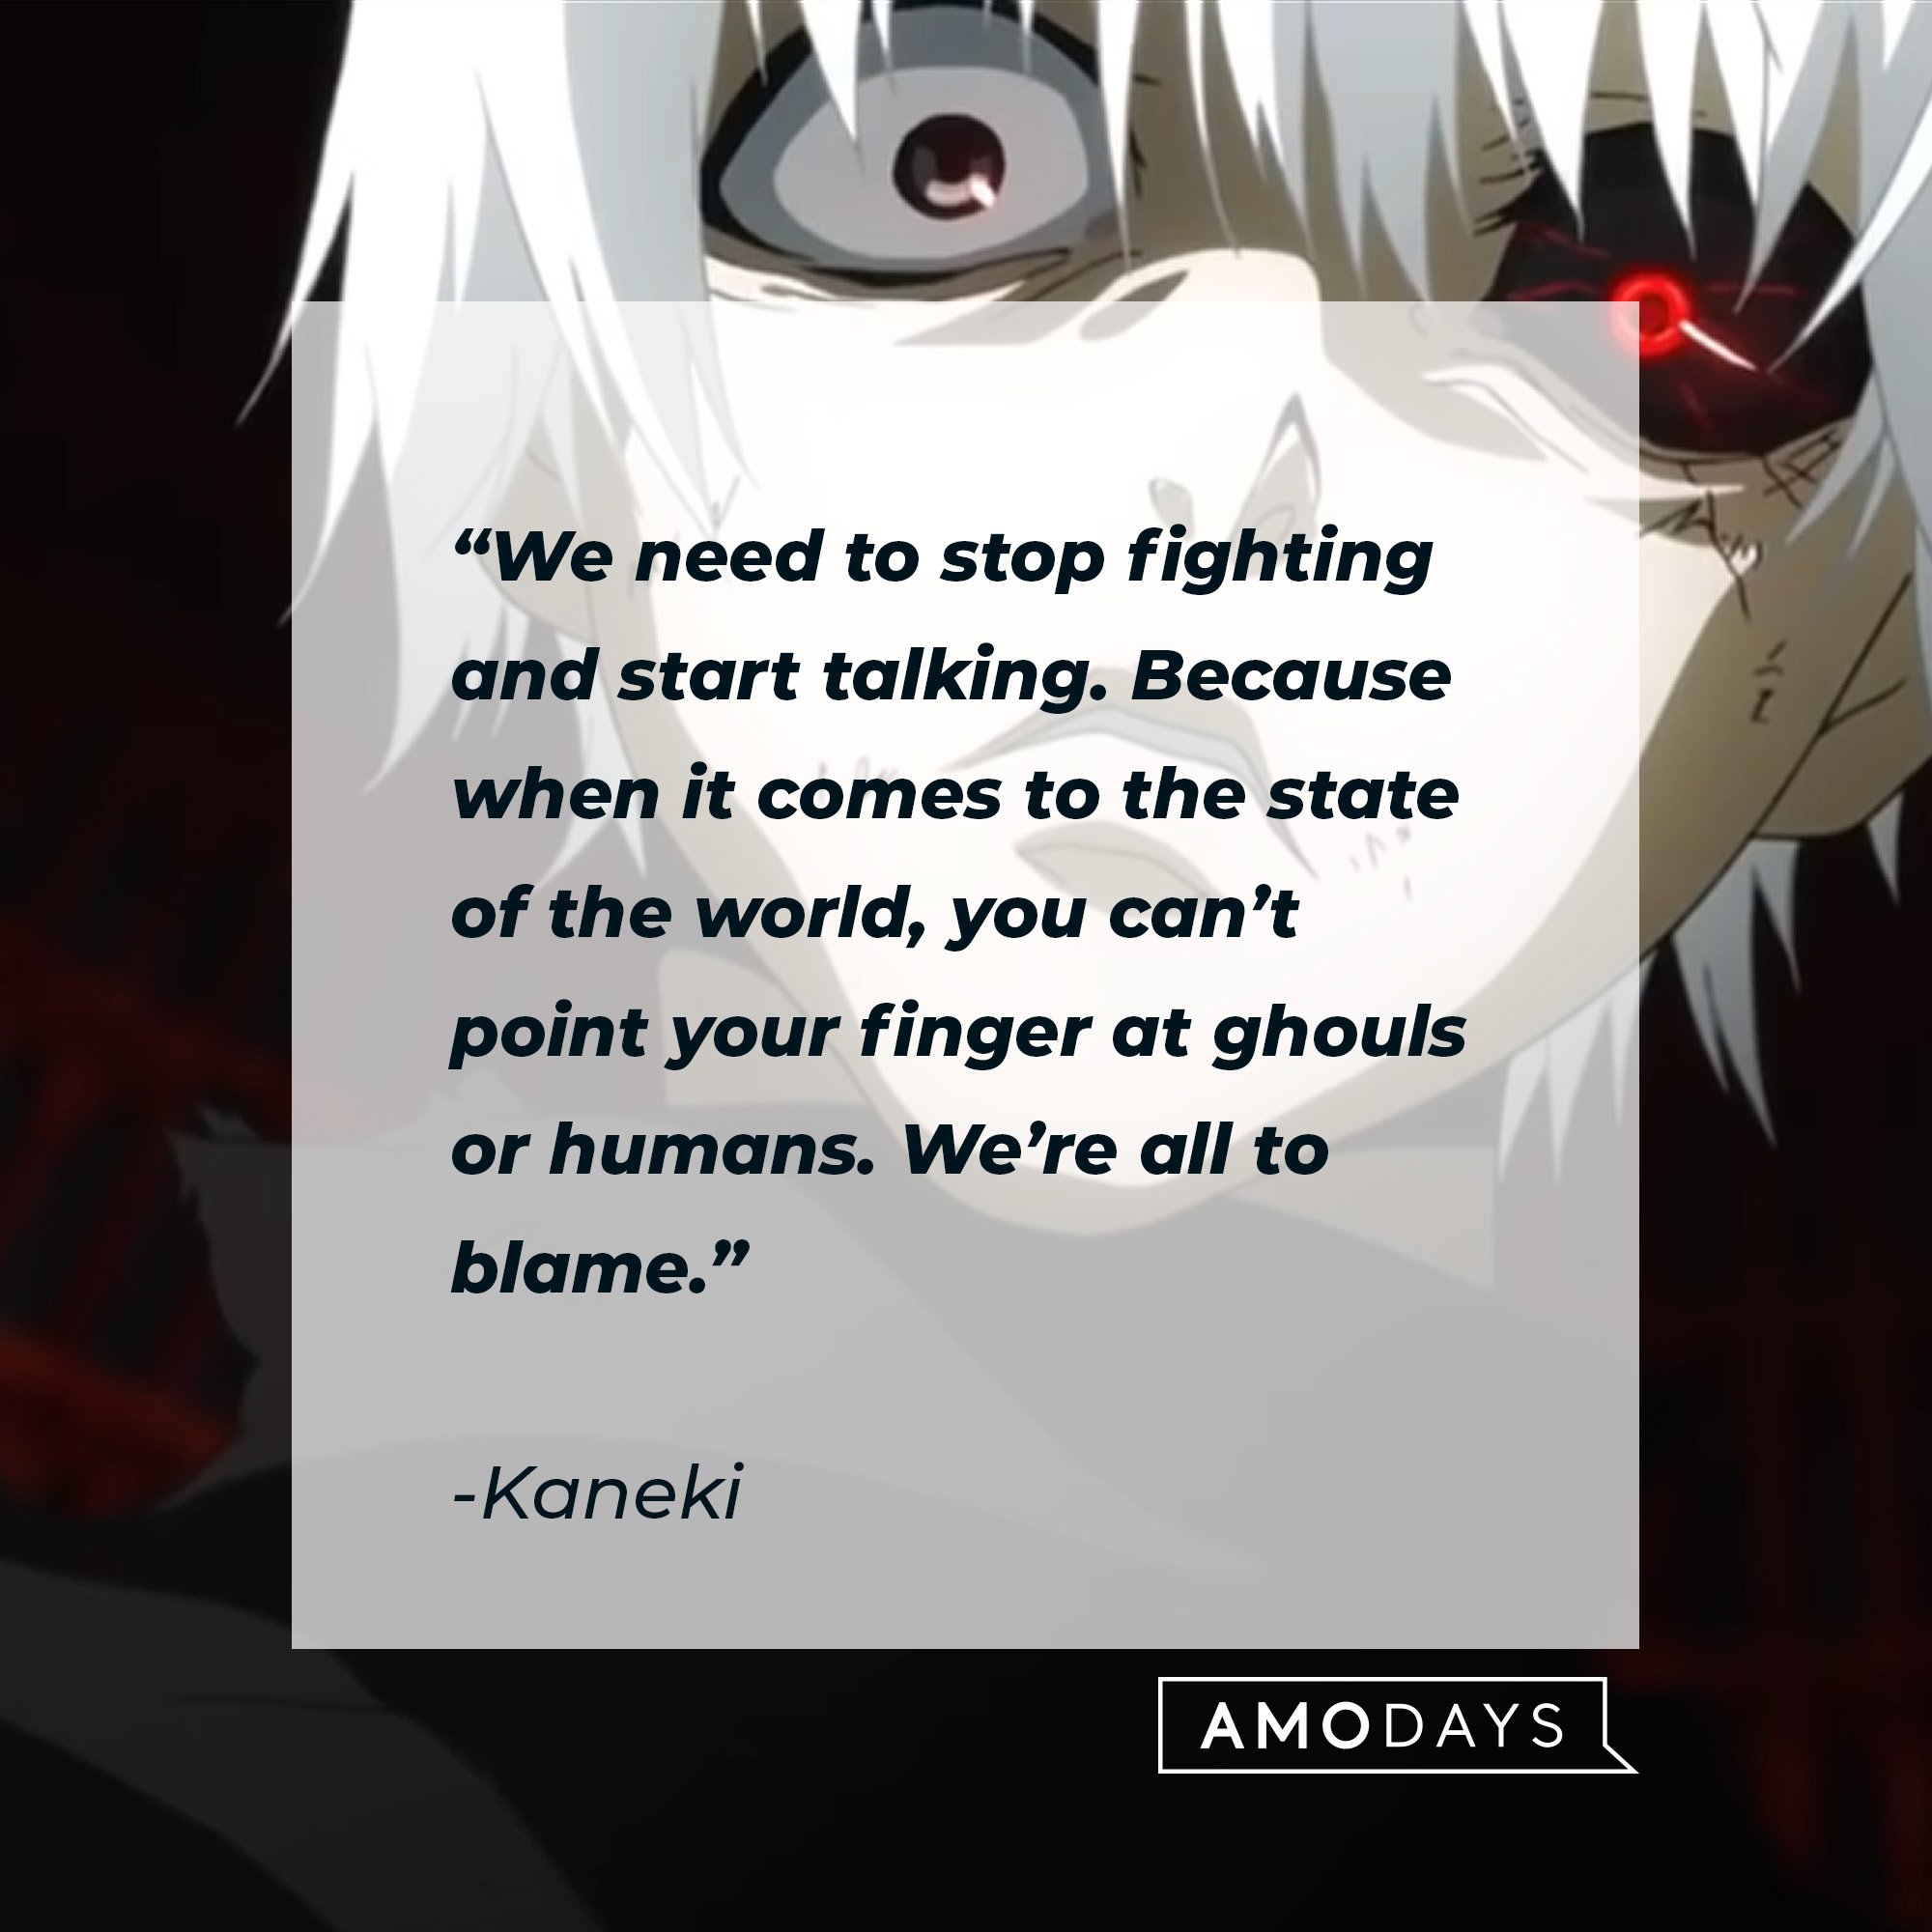 Kaneki's quote: “We need to stop fighting and start talking. Because when it comes to the state of the world, you can’t point your finger at ghouls or humans. We’re all to blame.” | Image: AmoDays